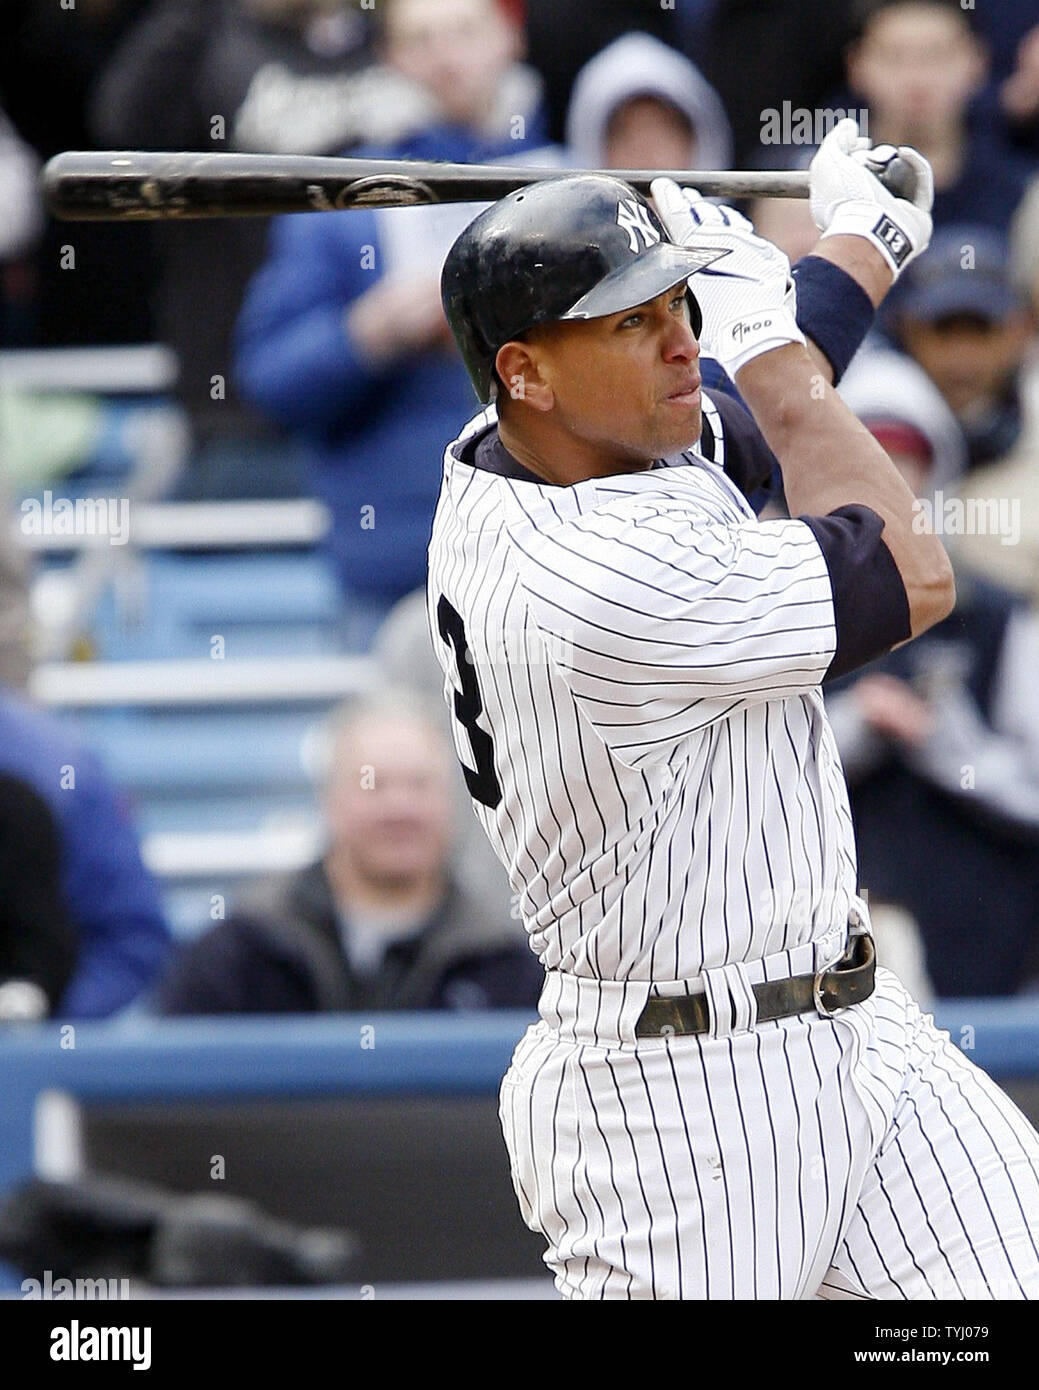 New York Yankees Alex Rodriguez watches the ball flight after hitting a grand slam in the bottom of the 9th inning at Yankees Stadium in New York City on April 7, 2007. The New York Yankees defeated the Baltimore Orioles 10-7.  (UPI Photo/John Angelillo) Stock Photo